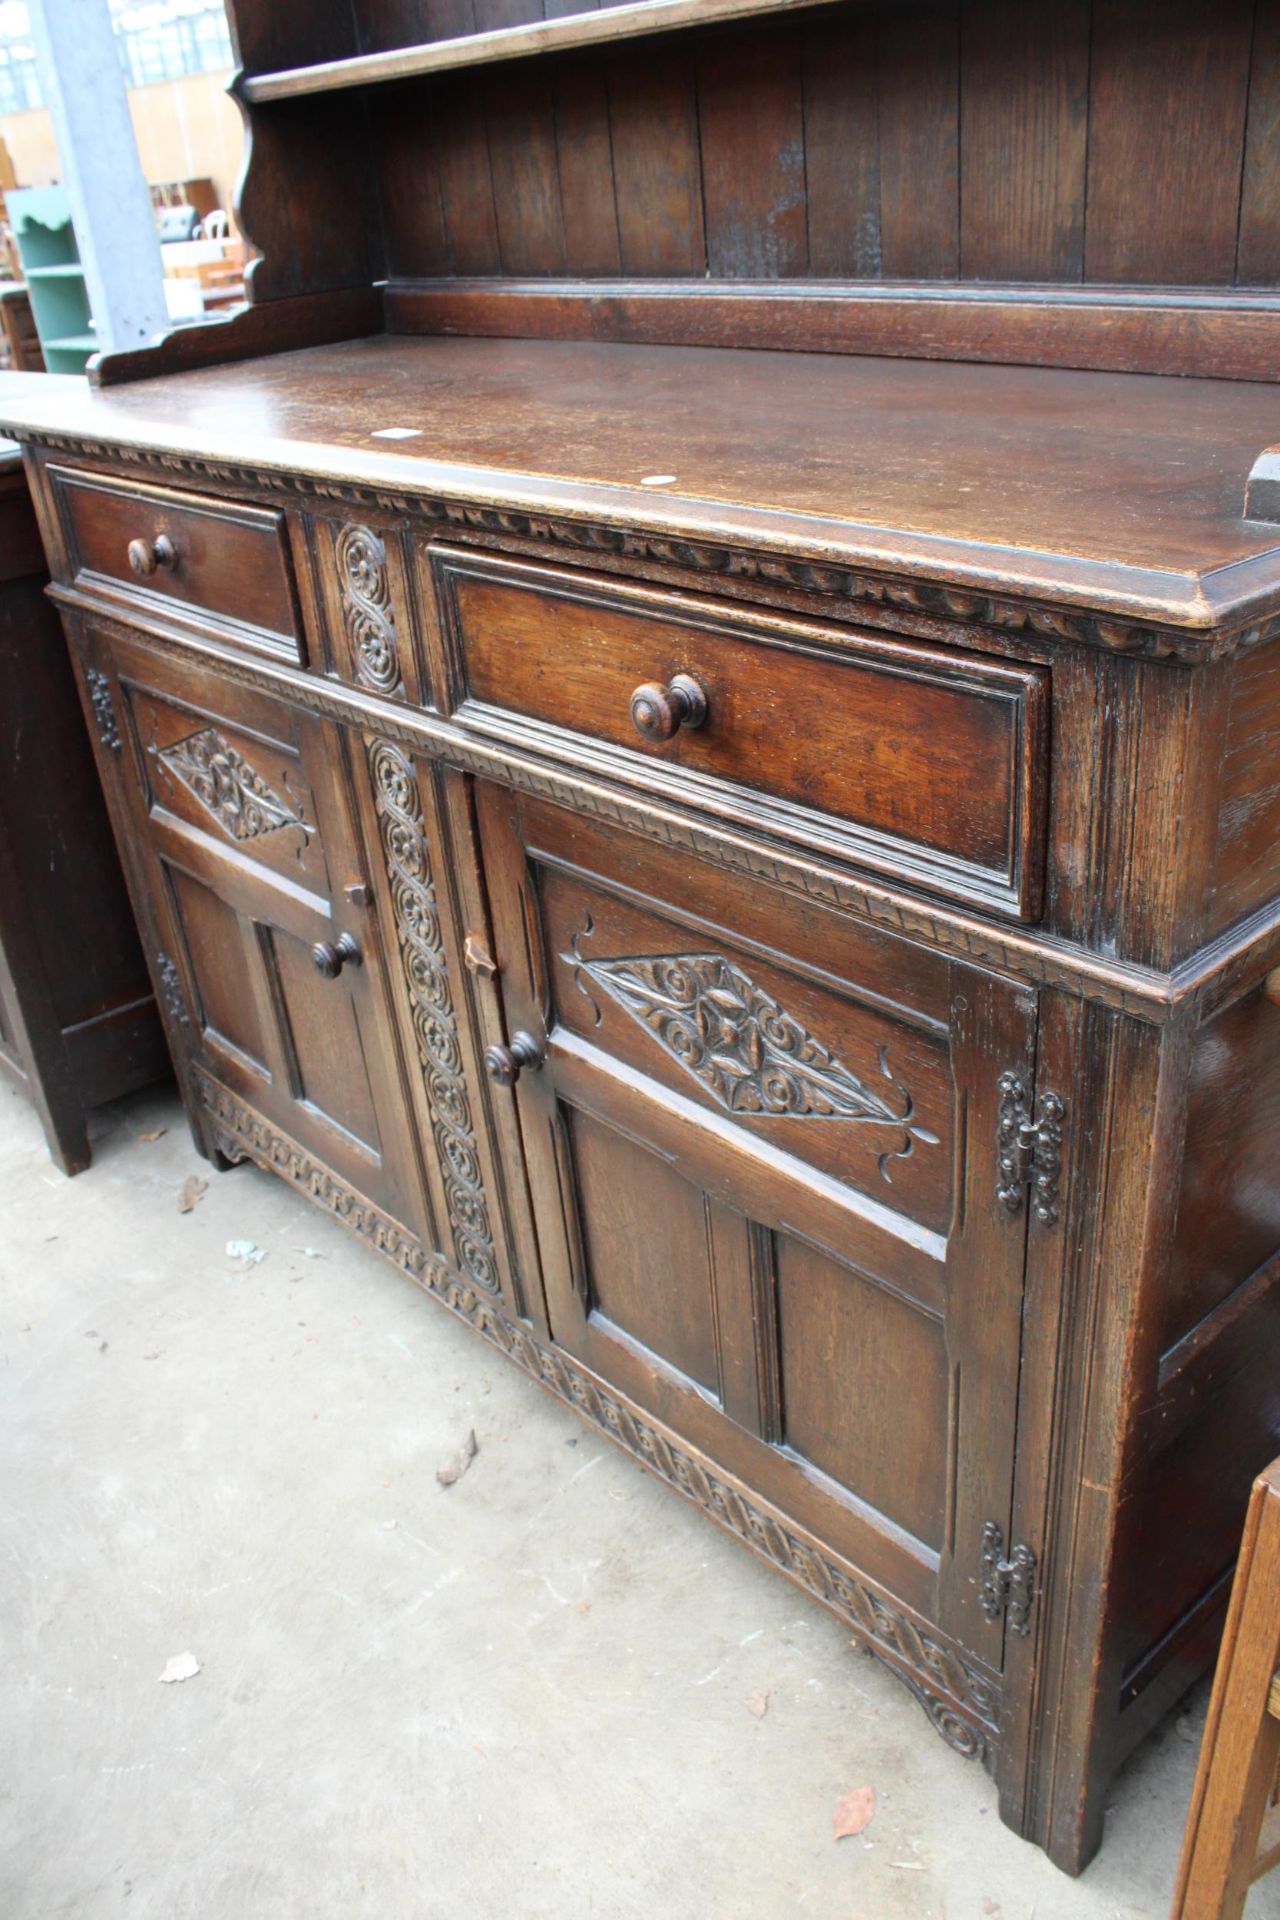 AN OAK JACOBEAN STYLE DRESSER WITH CARVED PANELS AND PLATE RACK, 56" WIDE - Image 3 of 5